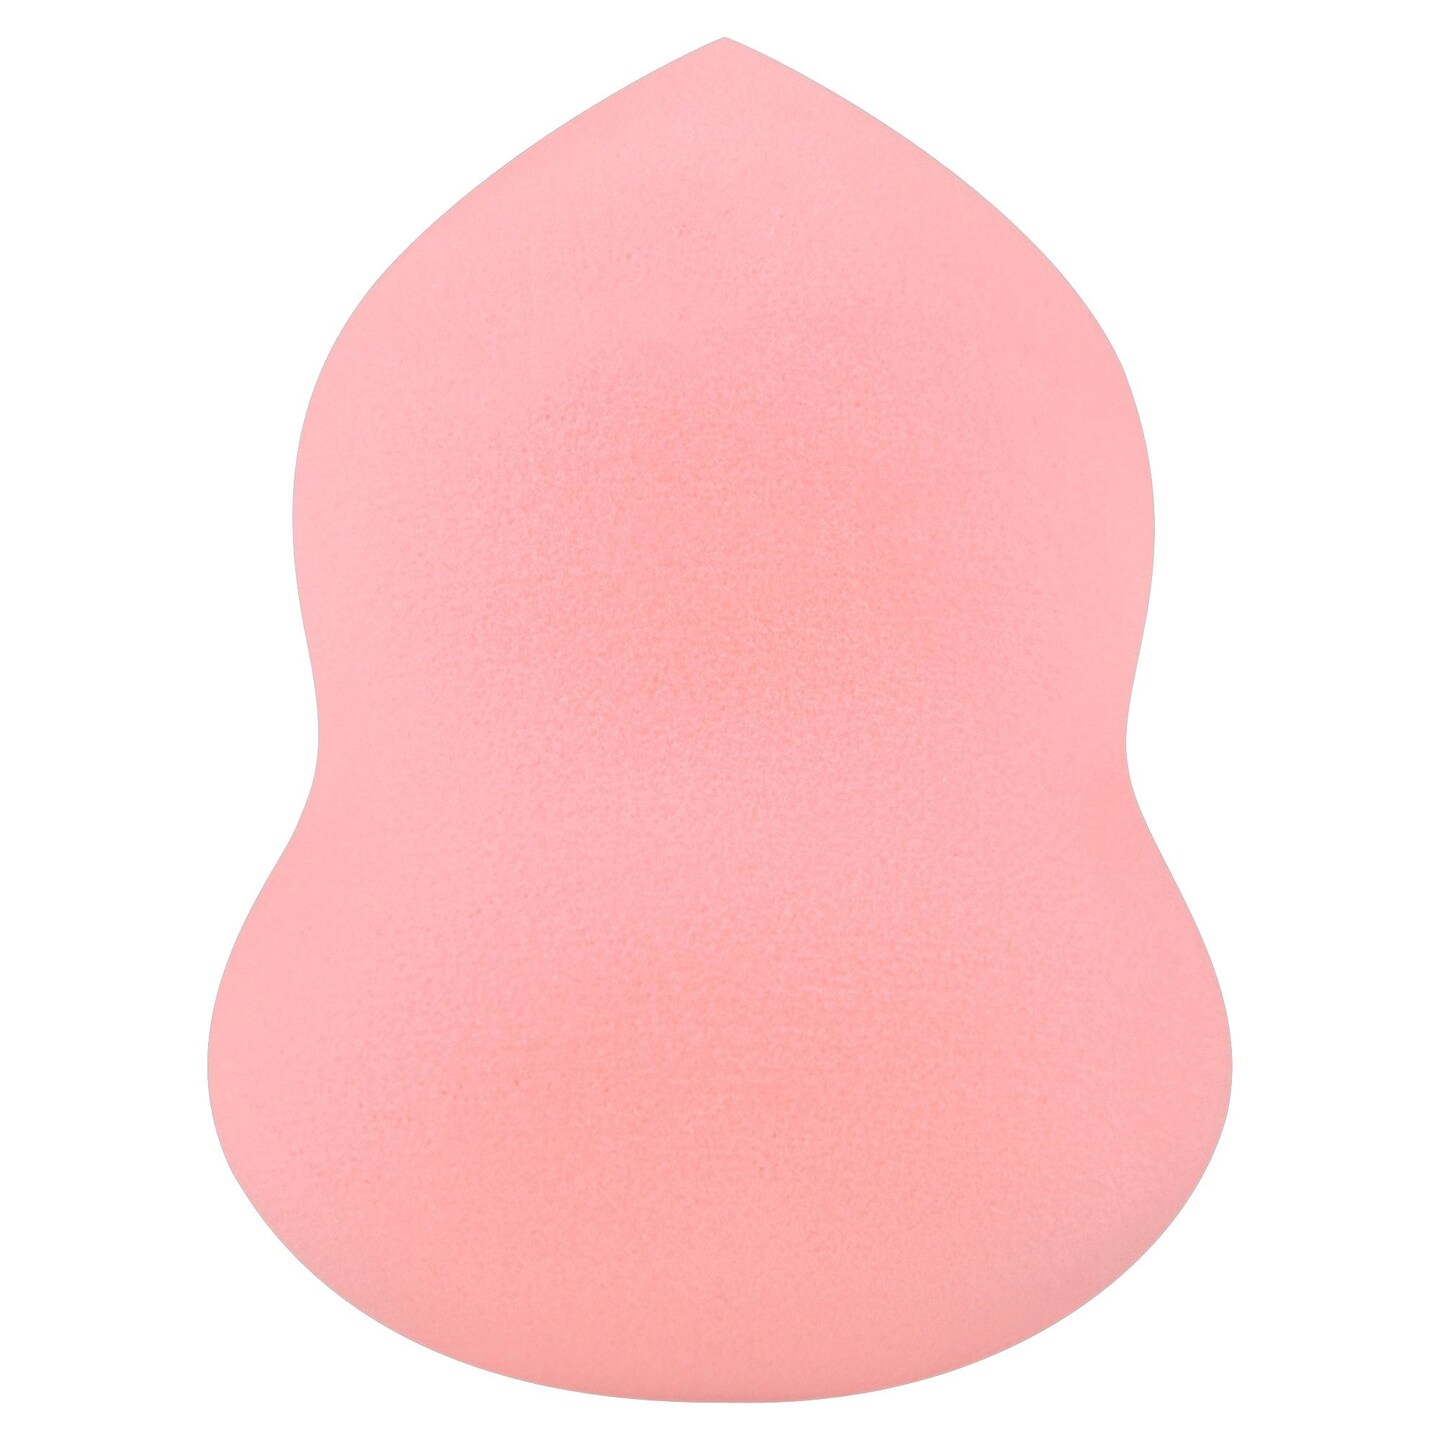 Light Pink Makeup Foundation Sponge for Face, Blending Puff Applicator for Beauty Coverage, 2.37 x 1.58 in